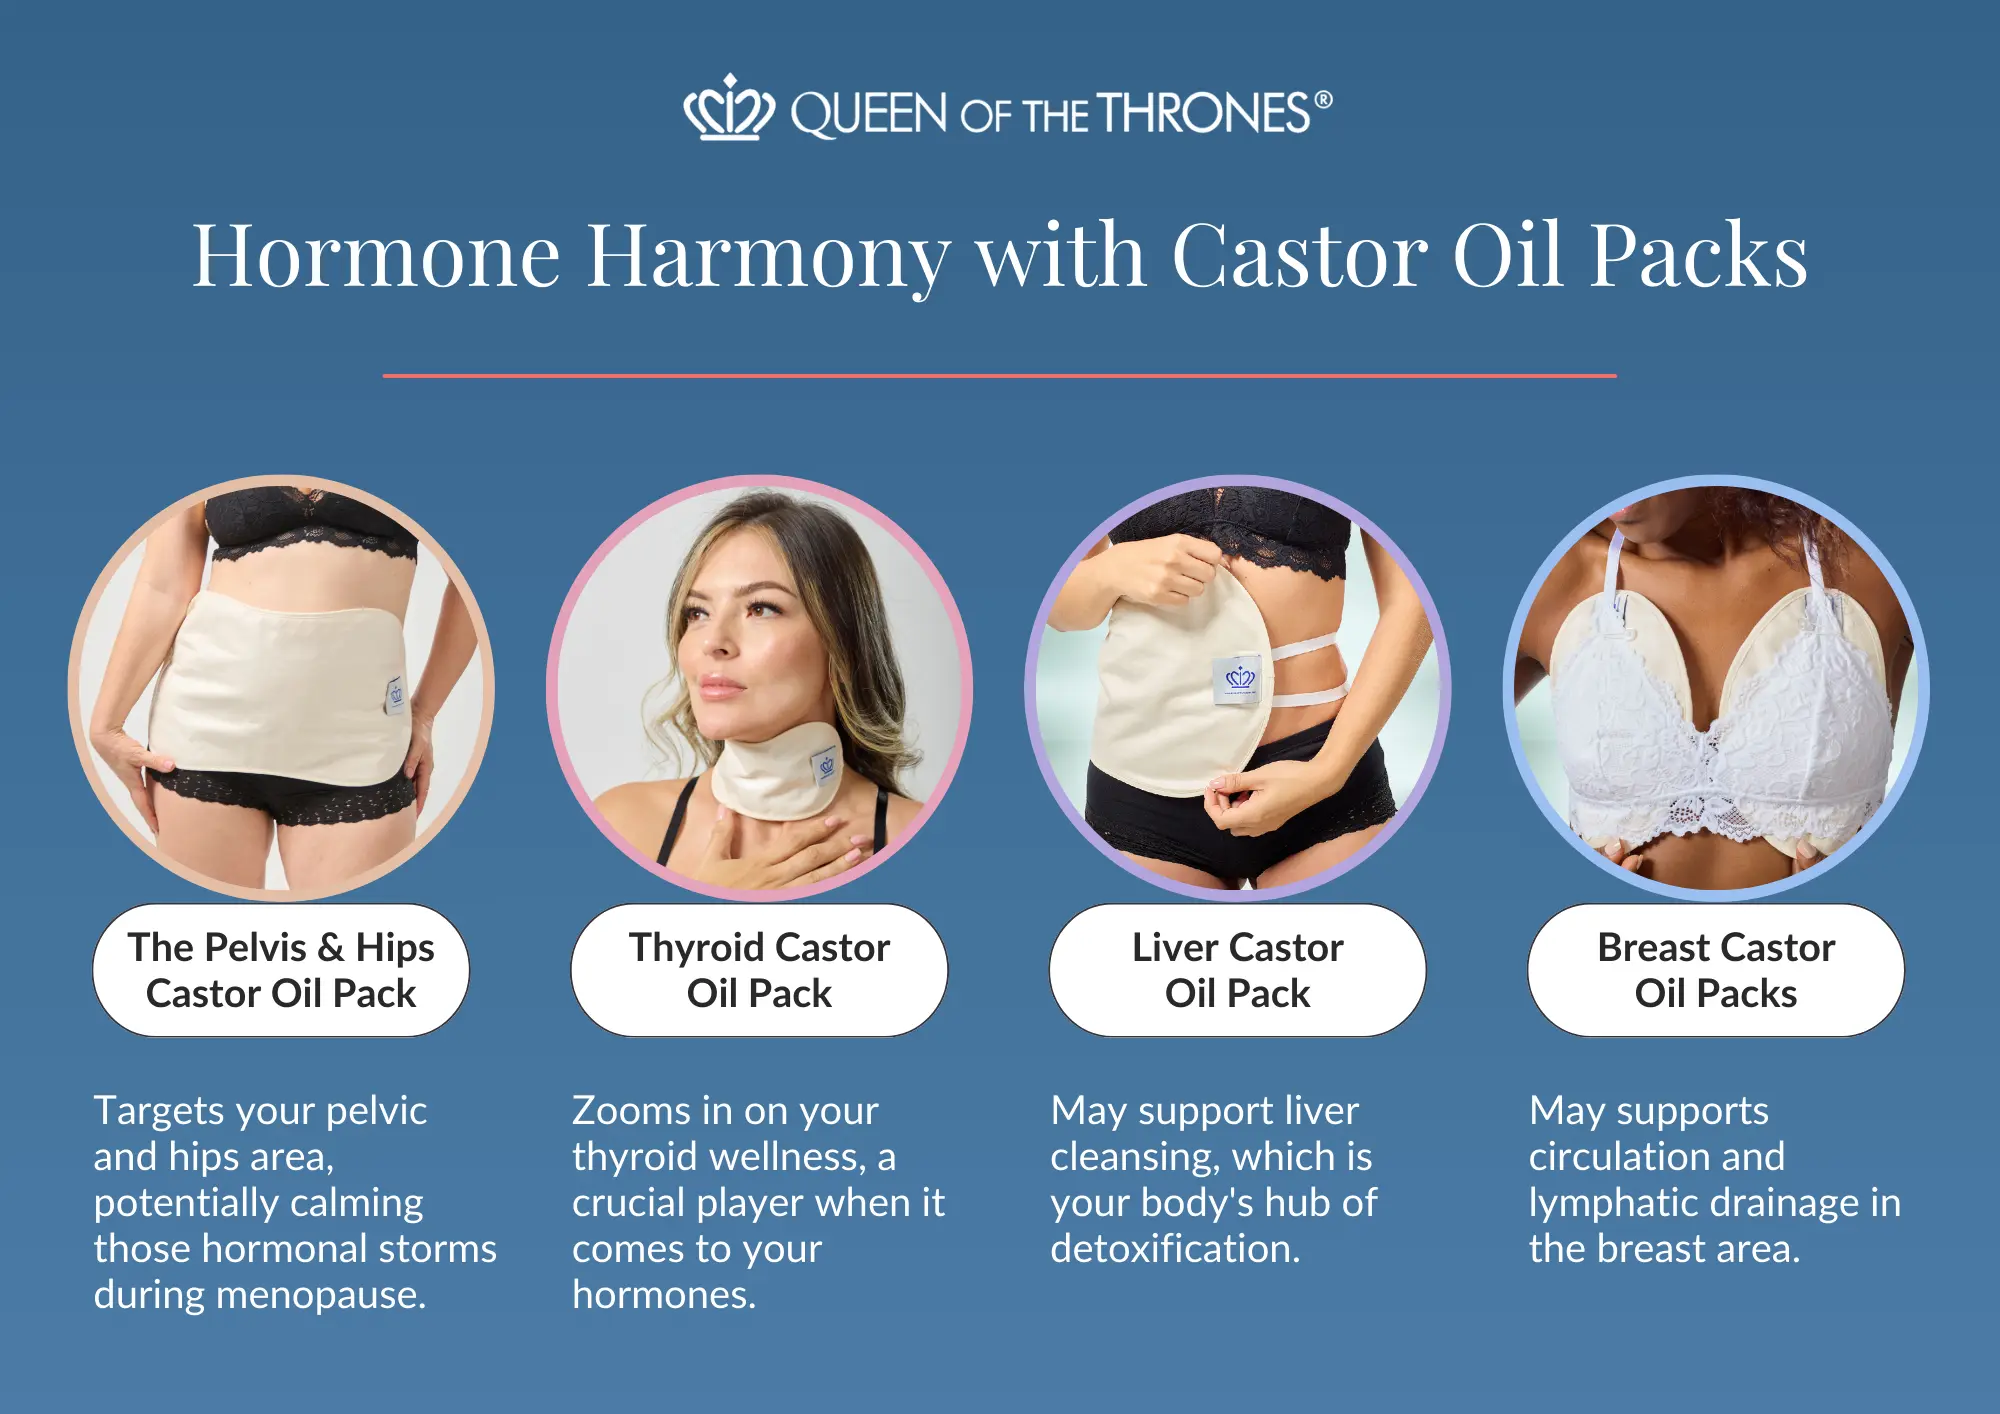 Hormone harmony with Queen of the Thrones Castor oil Packs